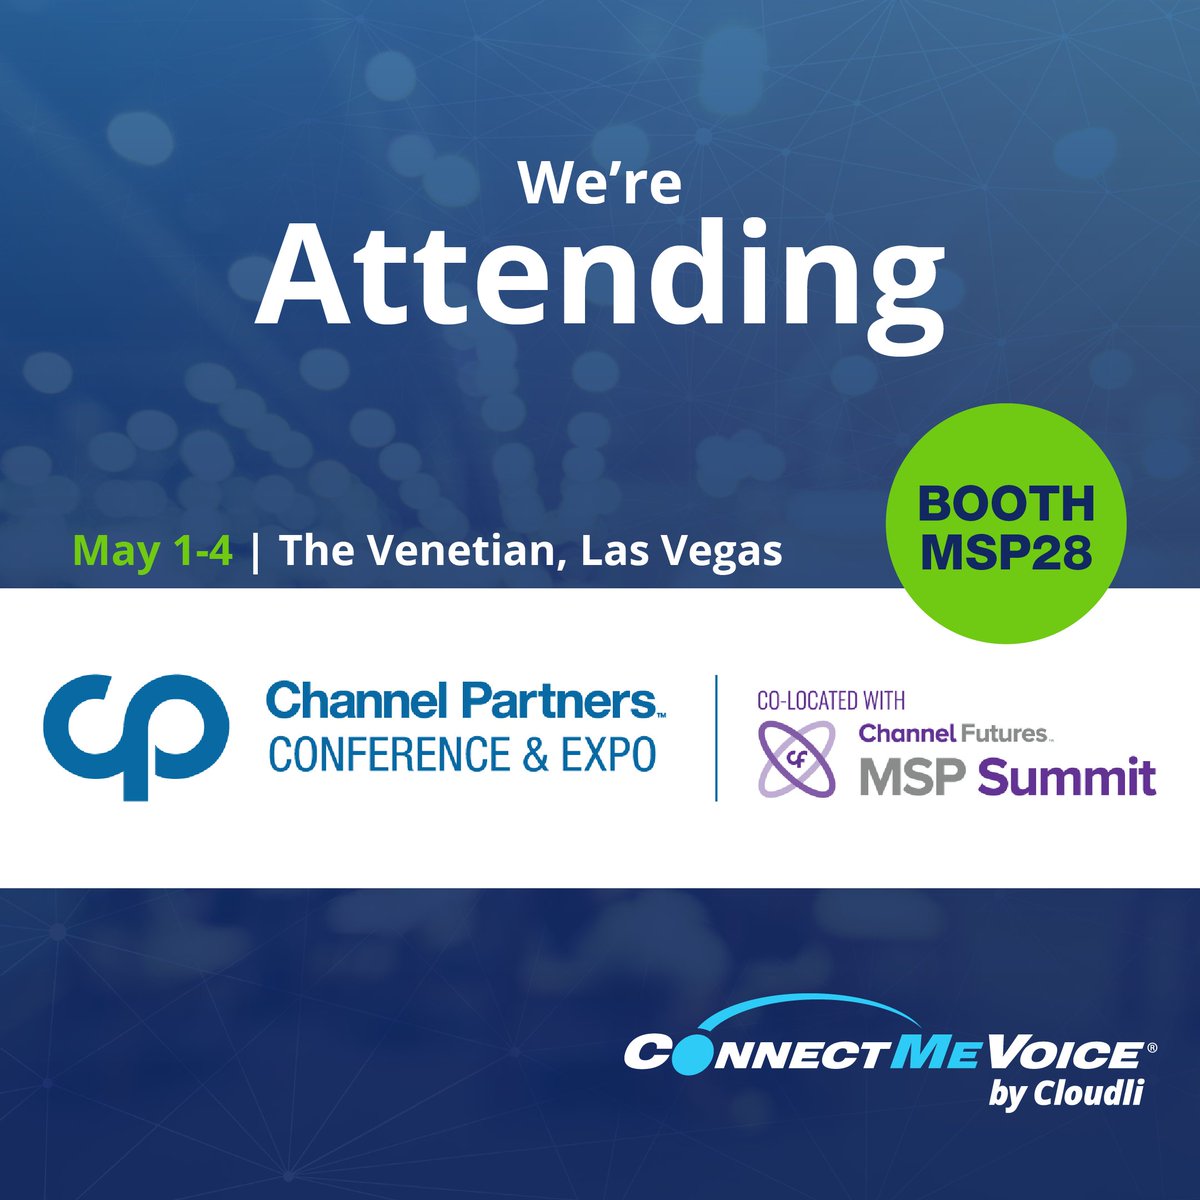 #ConnectMeVoice by Cloudli is proud to announce it will be exhibiting at #MSPSummit, and attending @Channel_Expo Partners Conference and Expo from May 1-4! Visit us at booth #MSP28 on May 1st or 2nd, or find us on the Channel Partners Expo floor on May 3rd and 4th.
#CPExpo #UCaaS